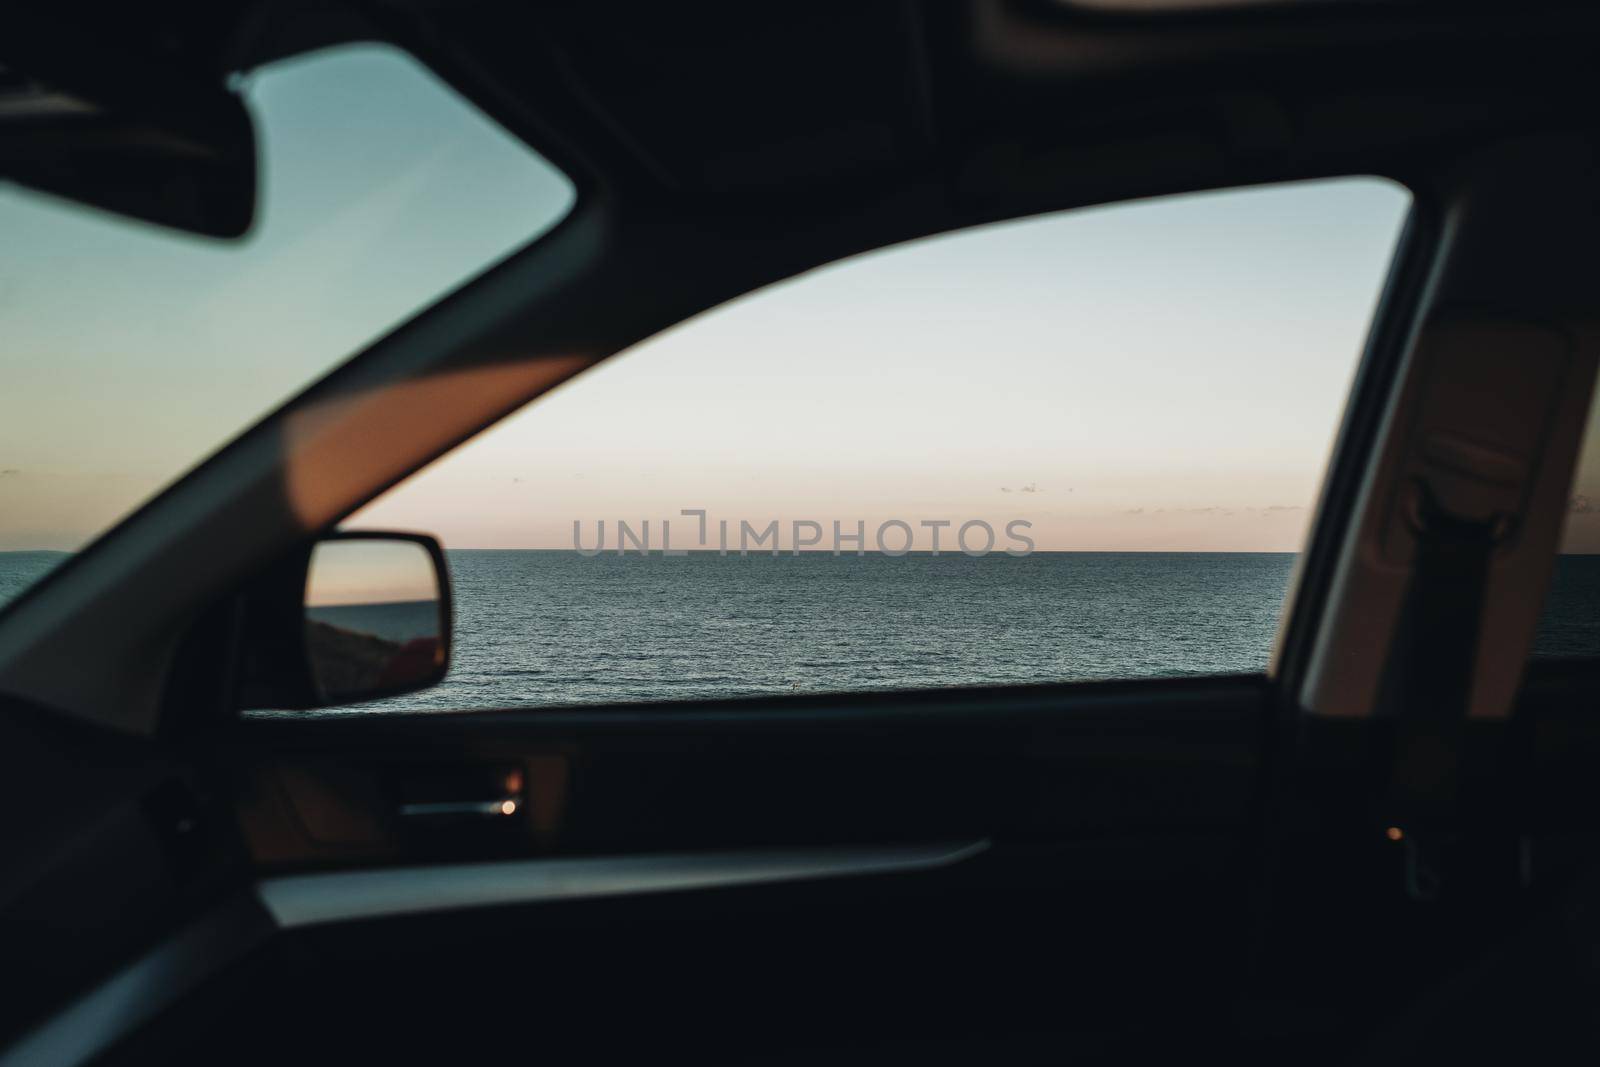 View Through Window of the Car on Sea Landscape at Sunset